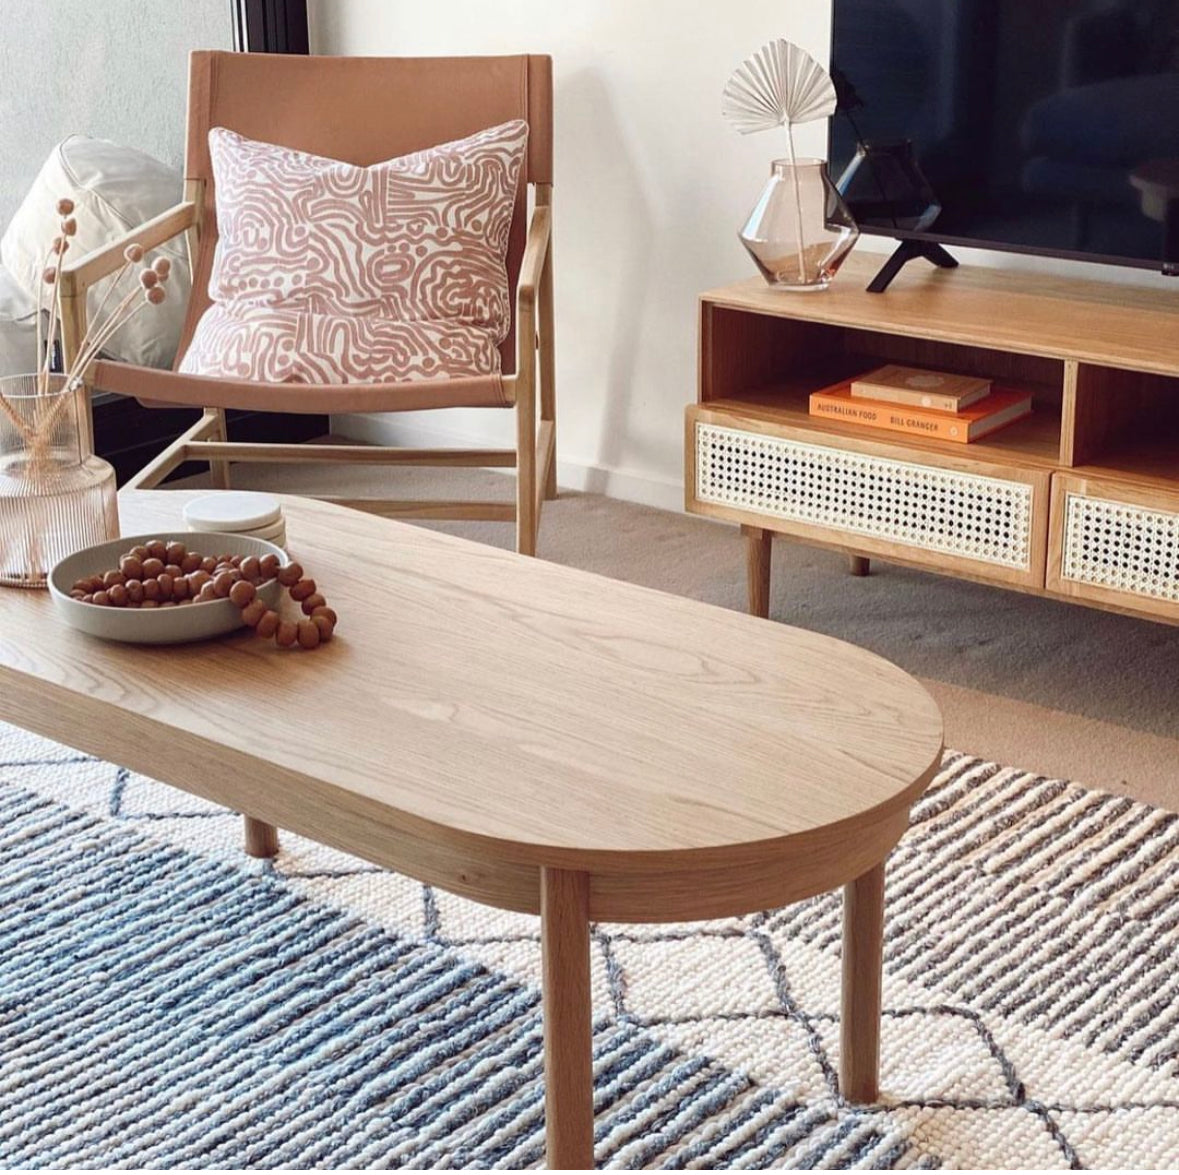 Why Scandinavian Rugs are the Best Choice for Every Home